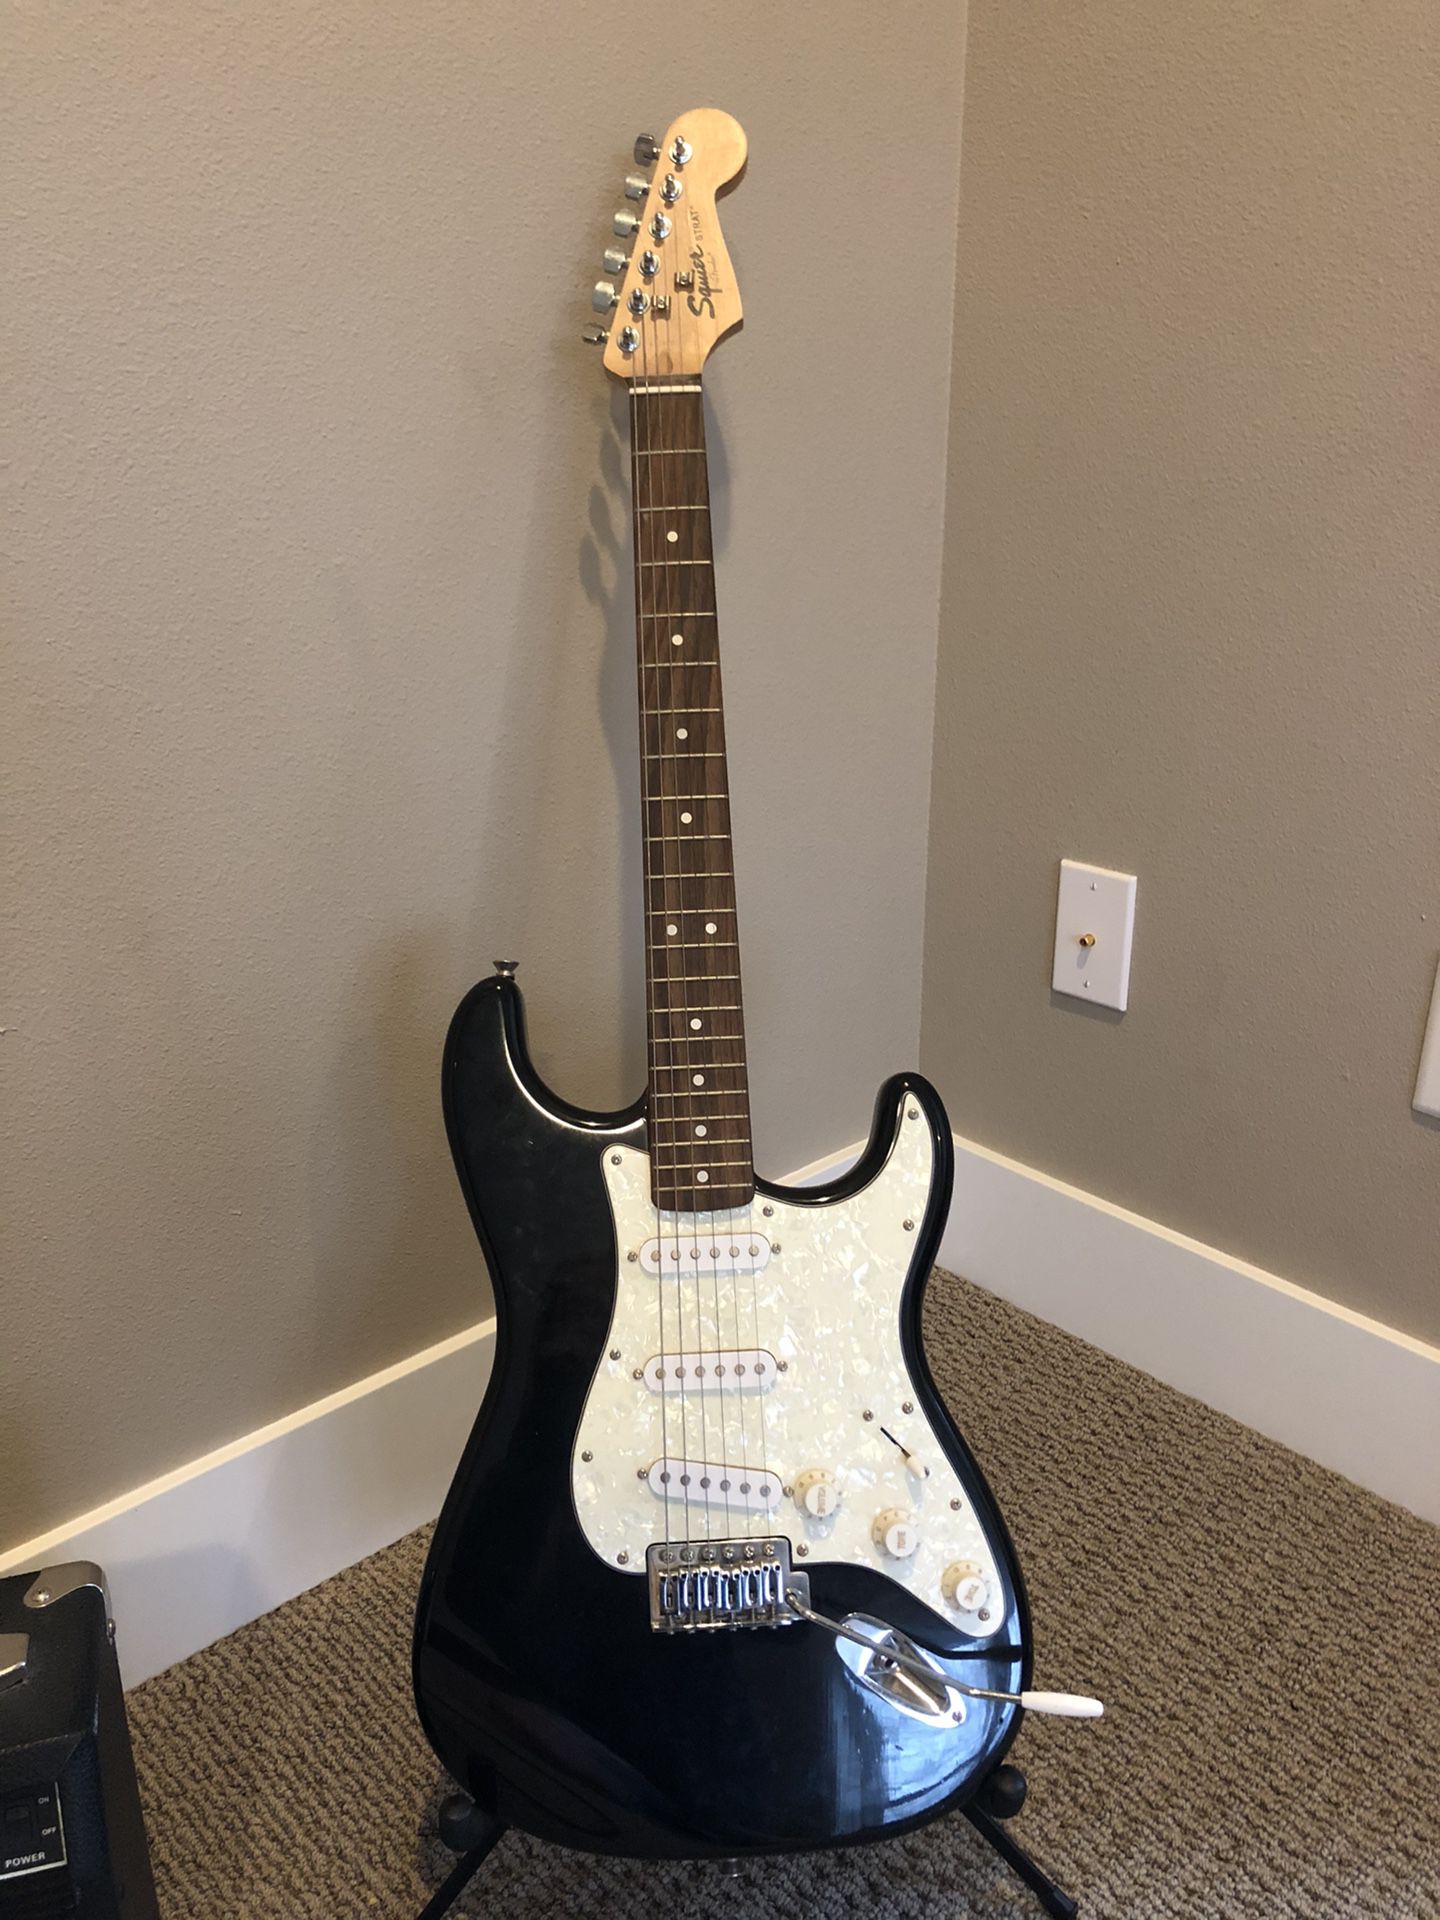 Fender Squier Guitar and Amp